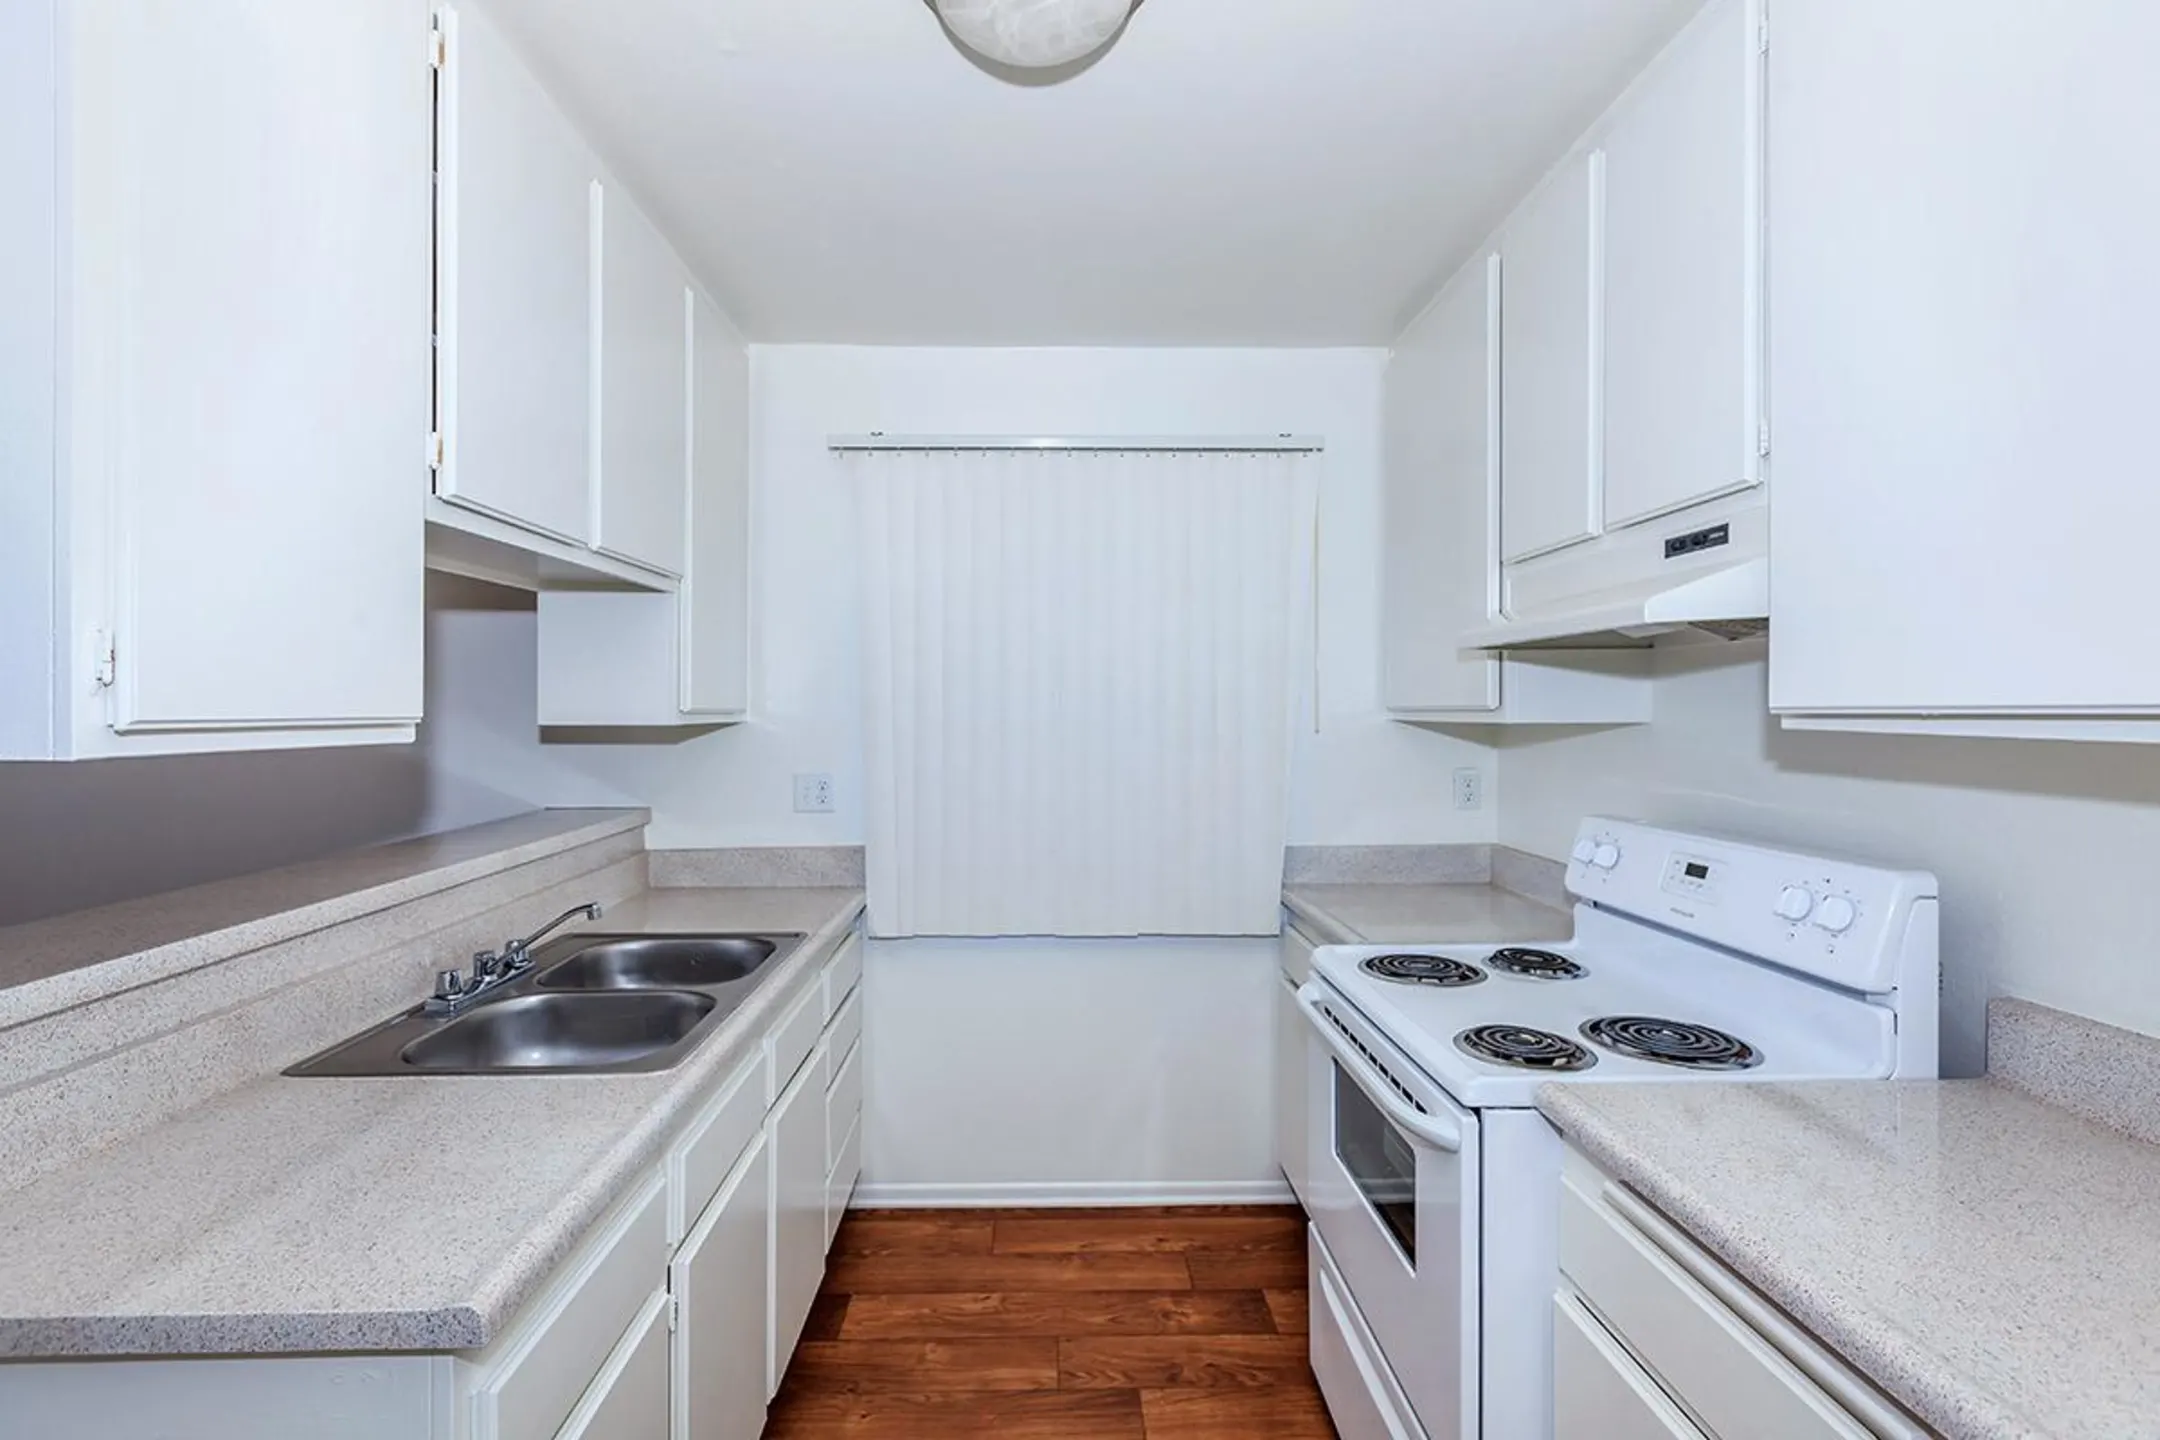 Kitchen - Pacific View Apartment Homes - Long Beach, CA